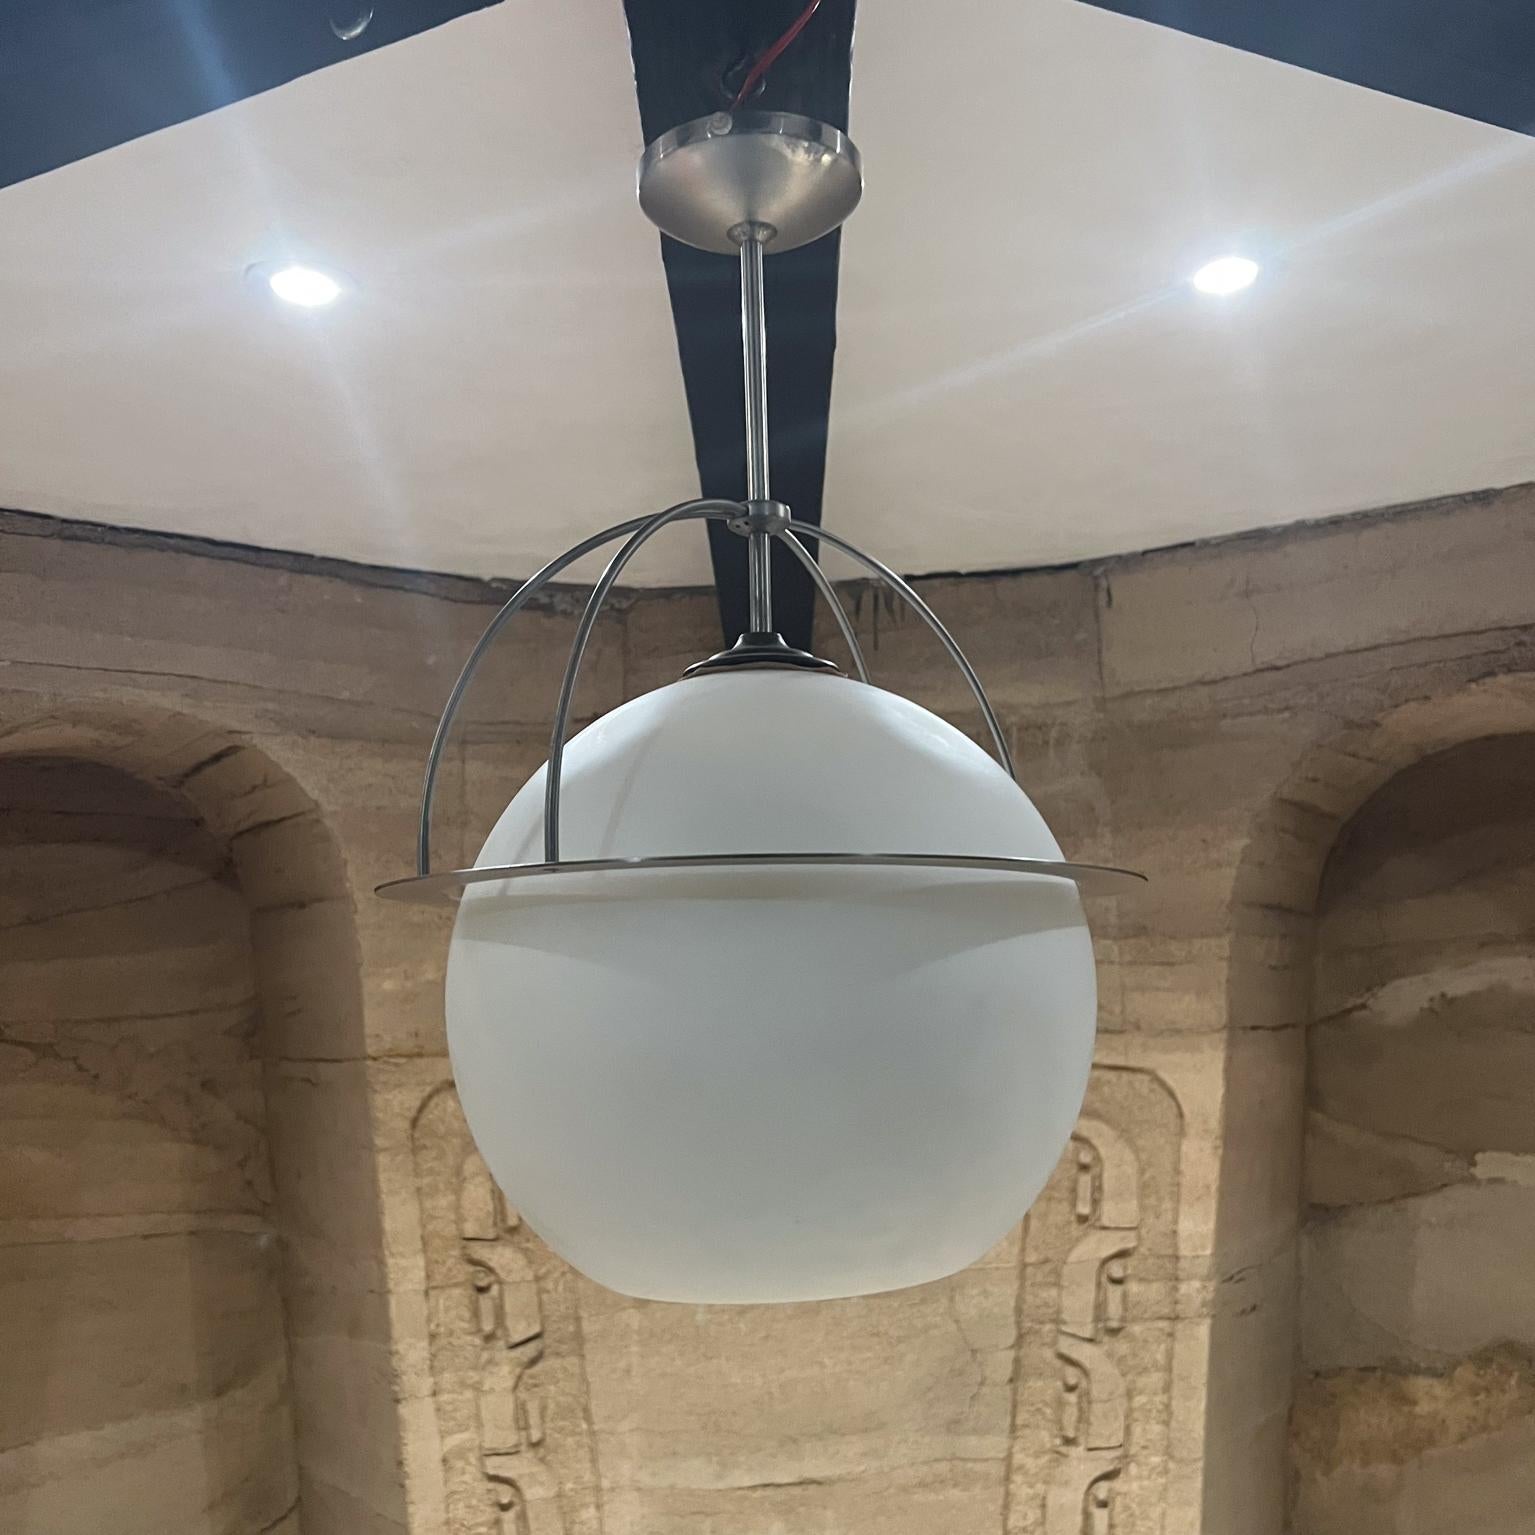 Modern Frosted Glass Pendant Suspension Lamp
In the style of Vico Magistretti Omega lamp.
25 h x 16 diameter
Preowned unrestored vintage condition
Glass has a crack on top, hard to notice, must be mentioned.
Refer to photos.